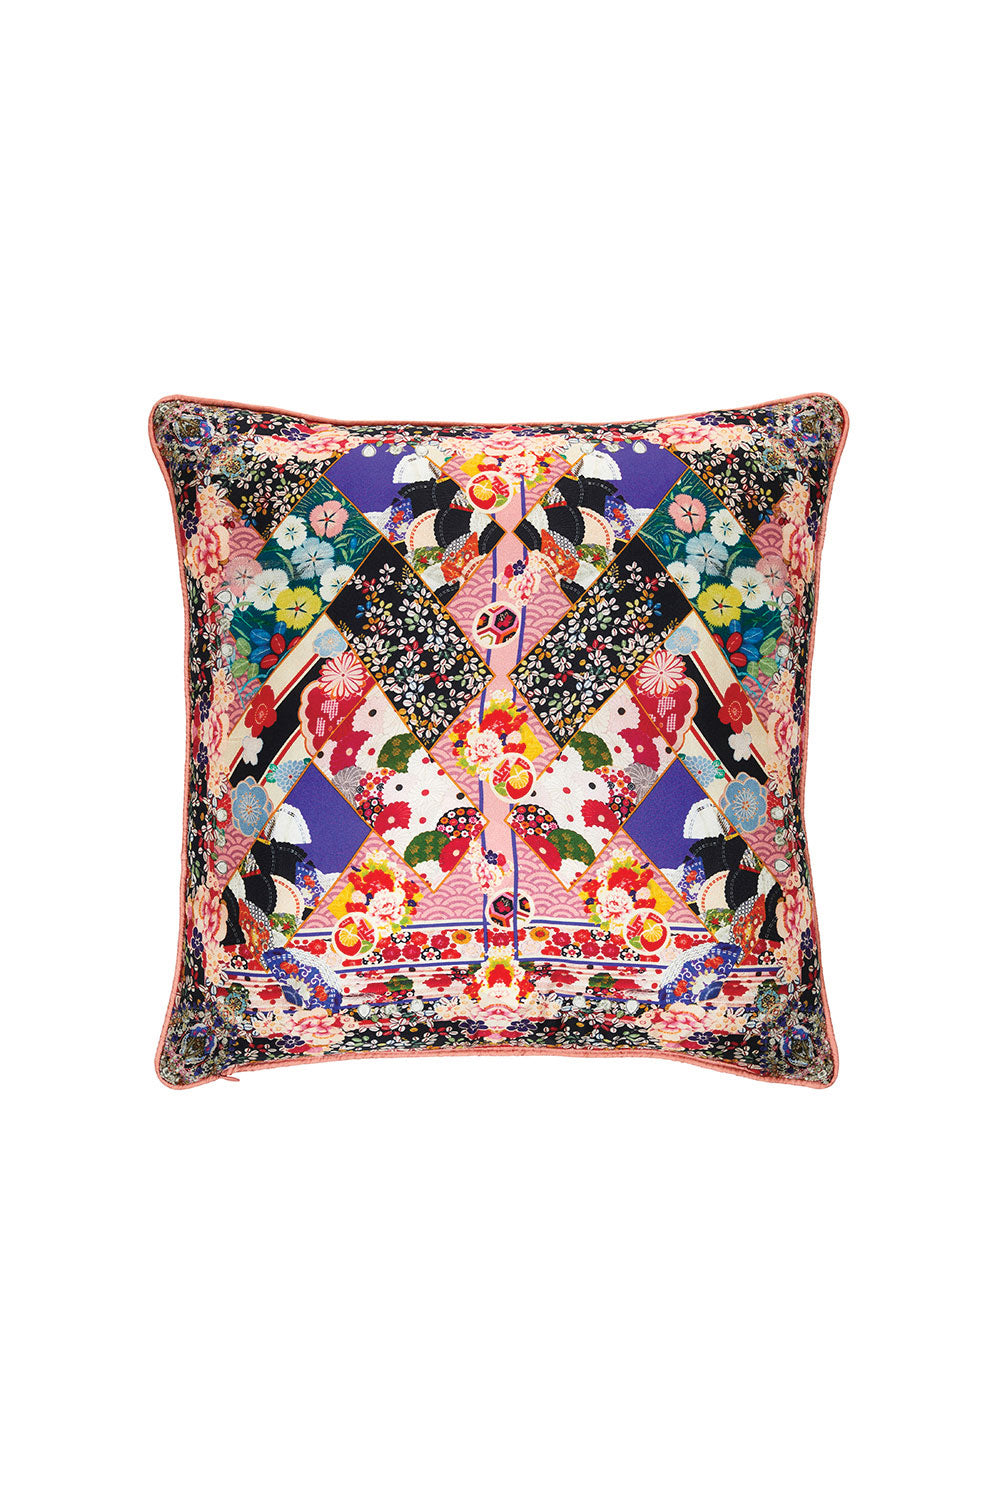 CAMILLA POSTCARDS FROM MARS SMALL SQUARE CUSHION